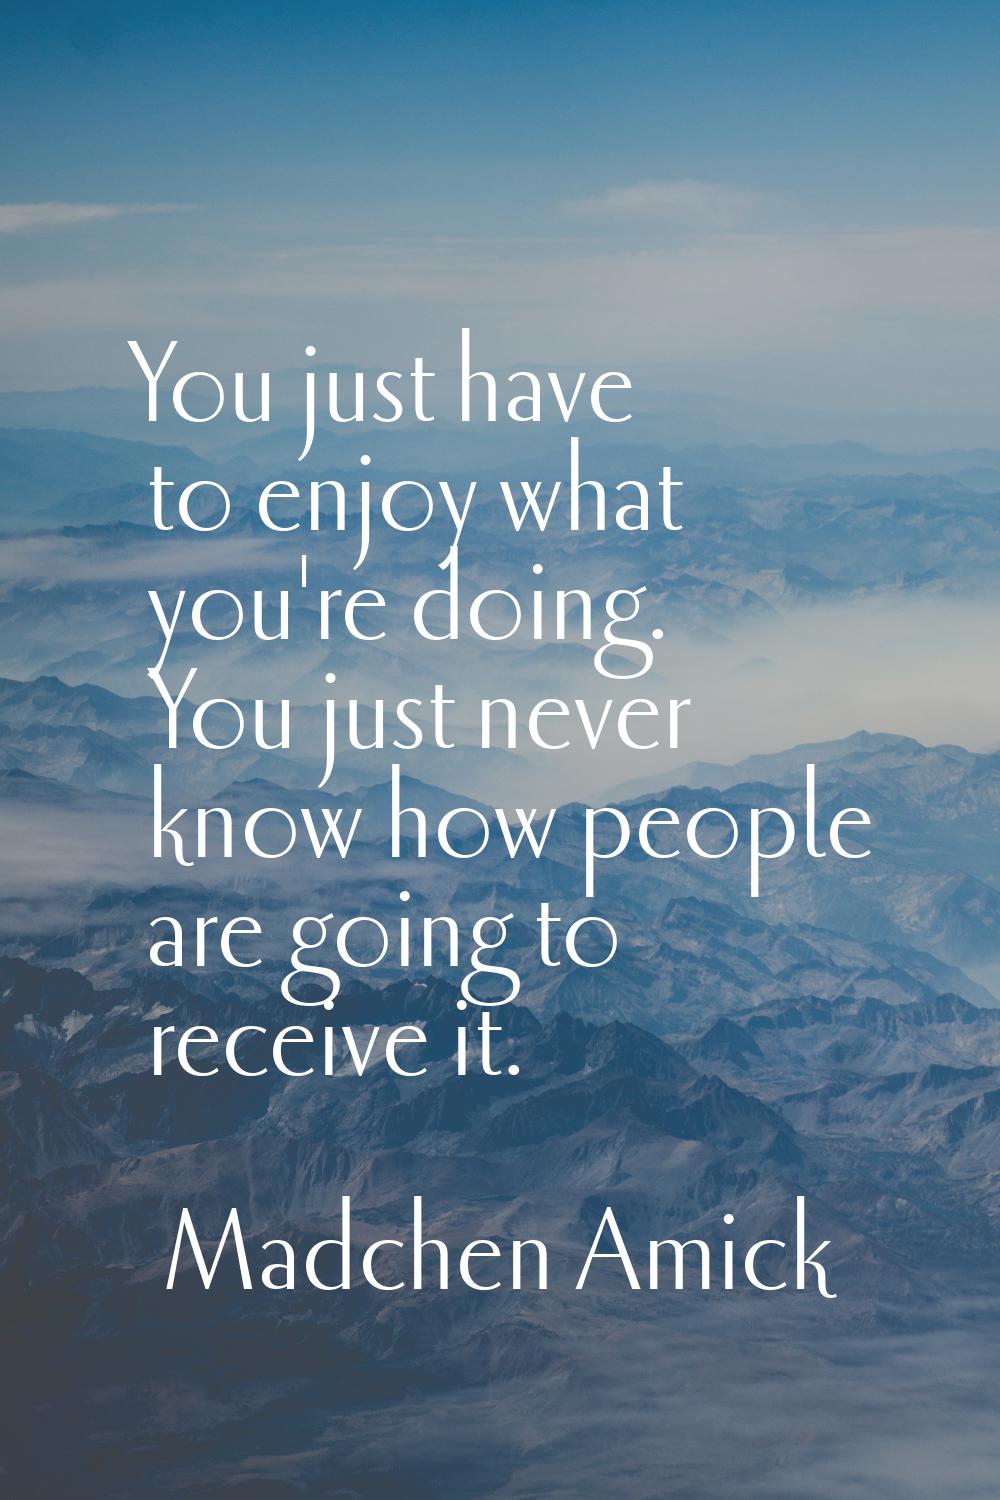 You just have to enjoy what you're doing. You just never know how people are going to receive it.